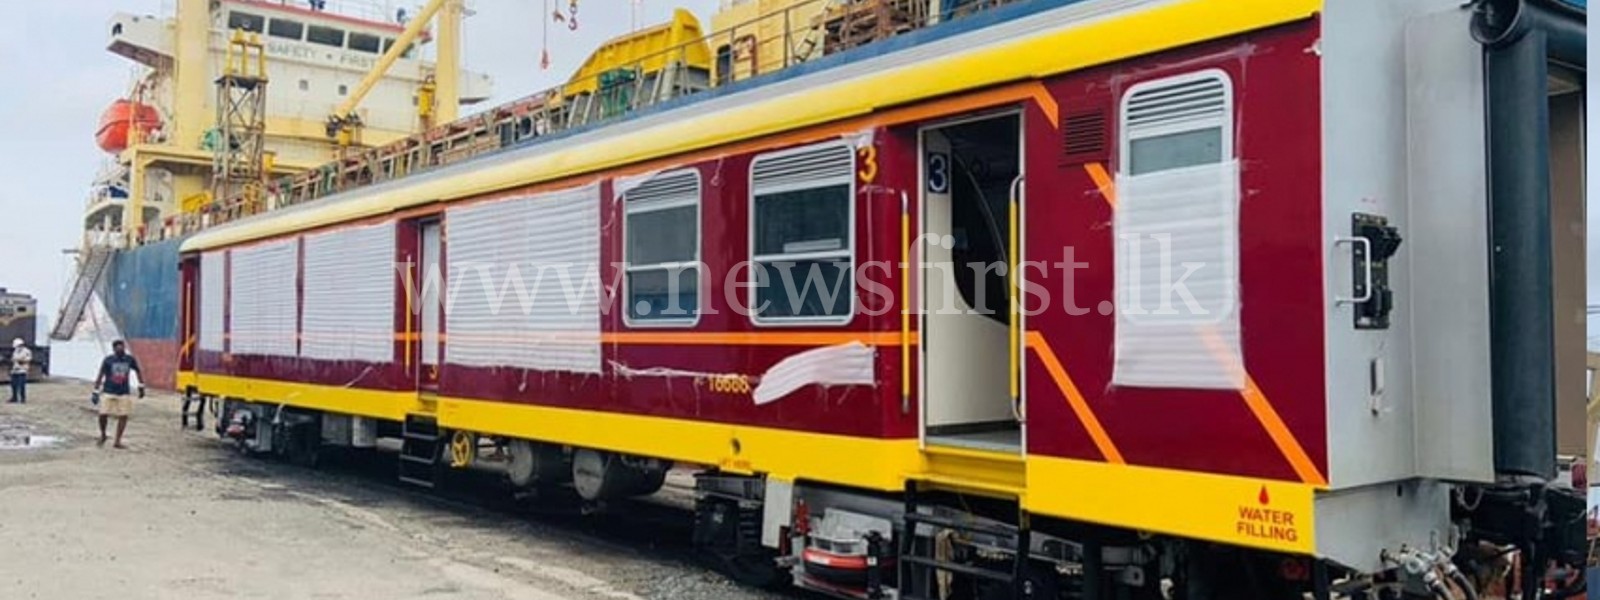 103 Indian train compartments NOT in use – COPA